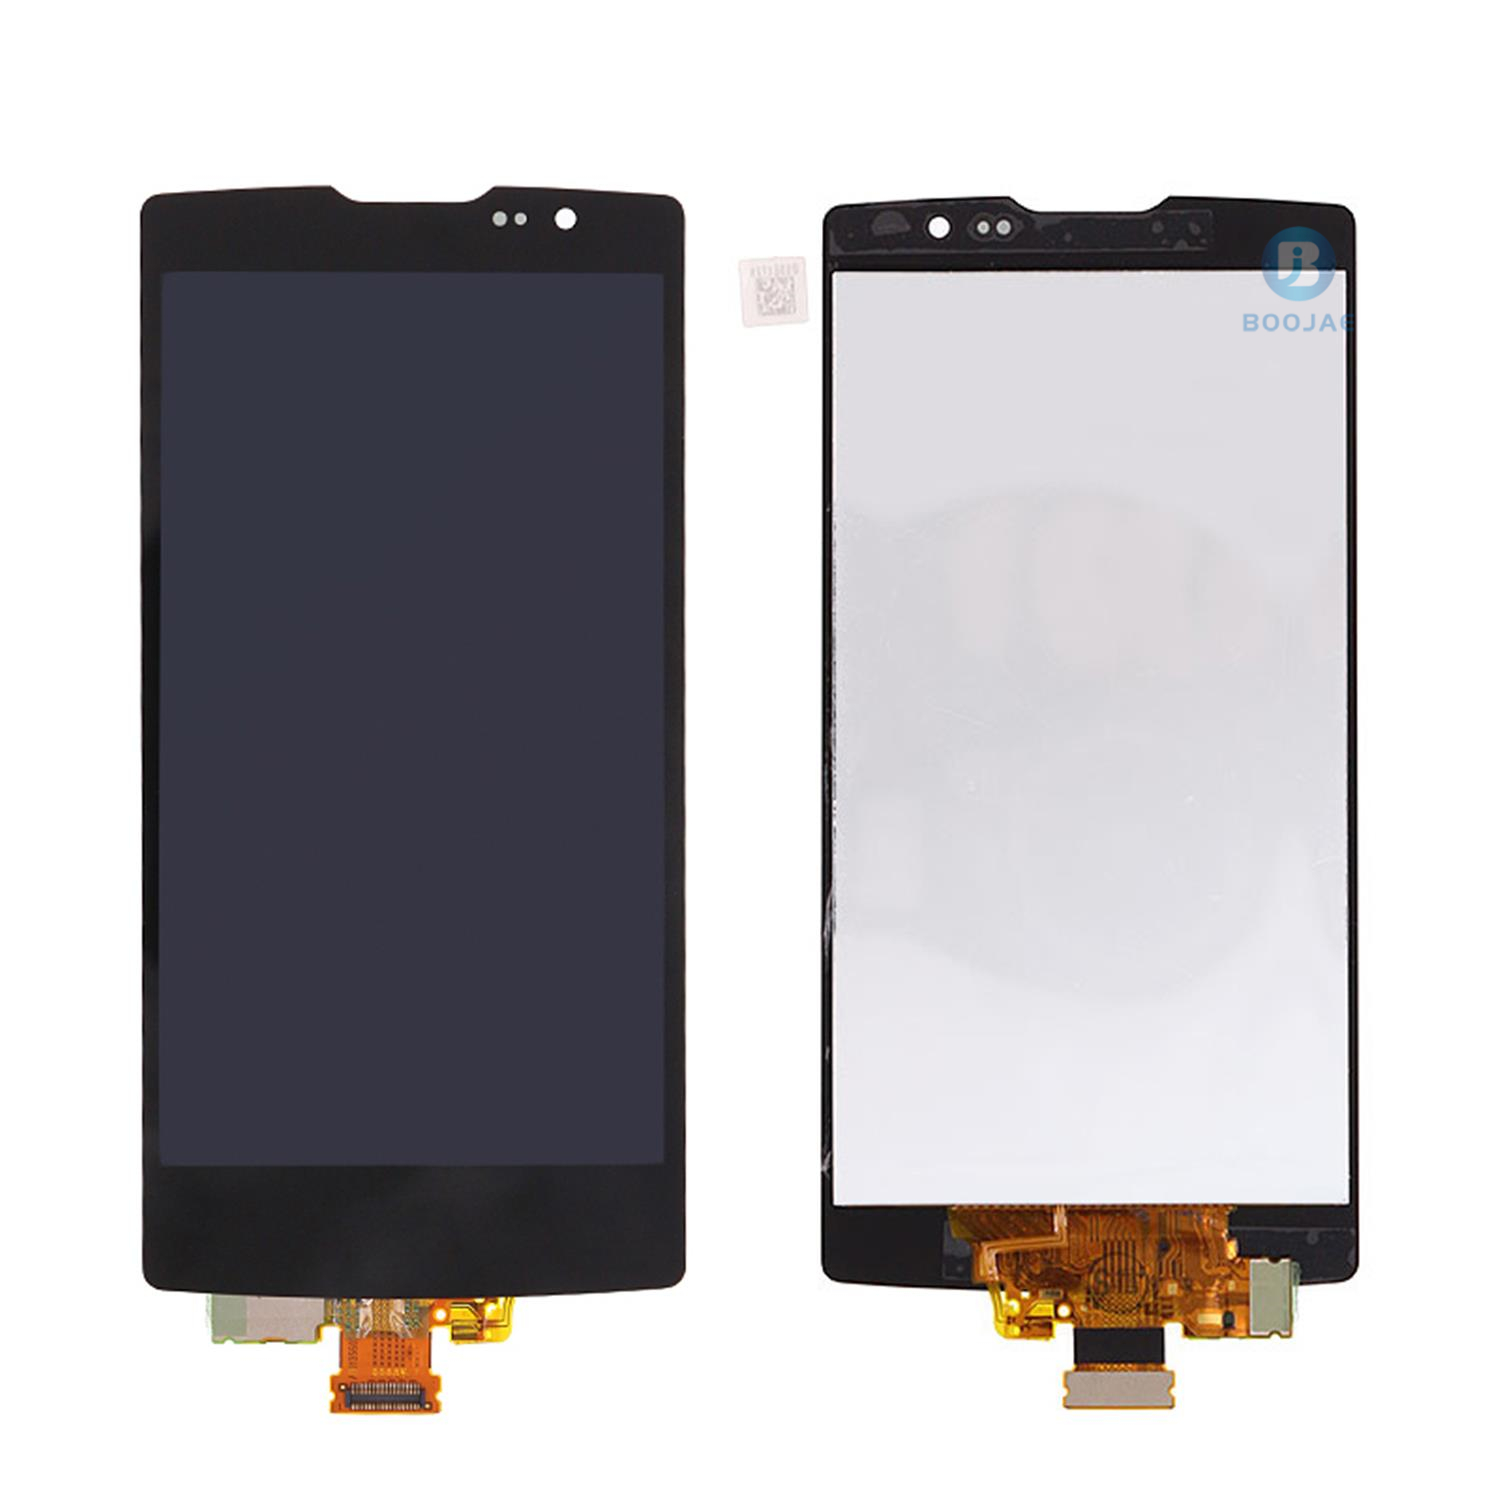 LG H440 LCD Screen Display, Lcd Assembly Replacement